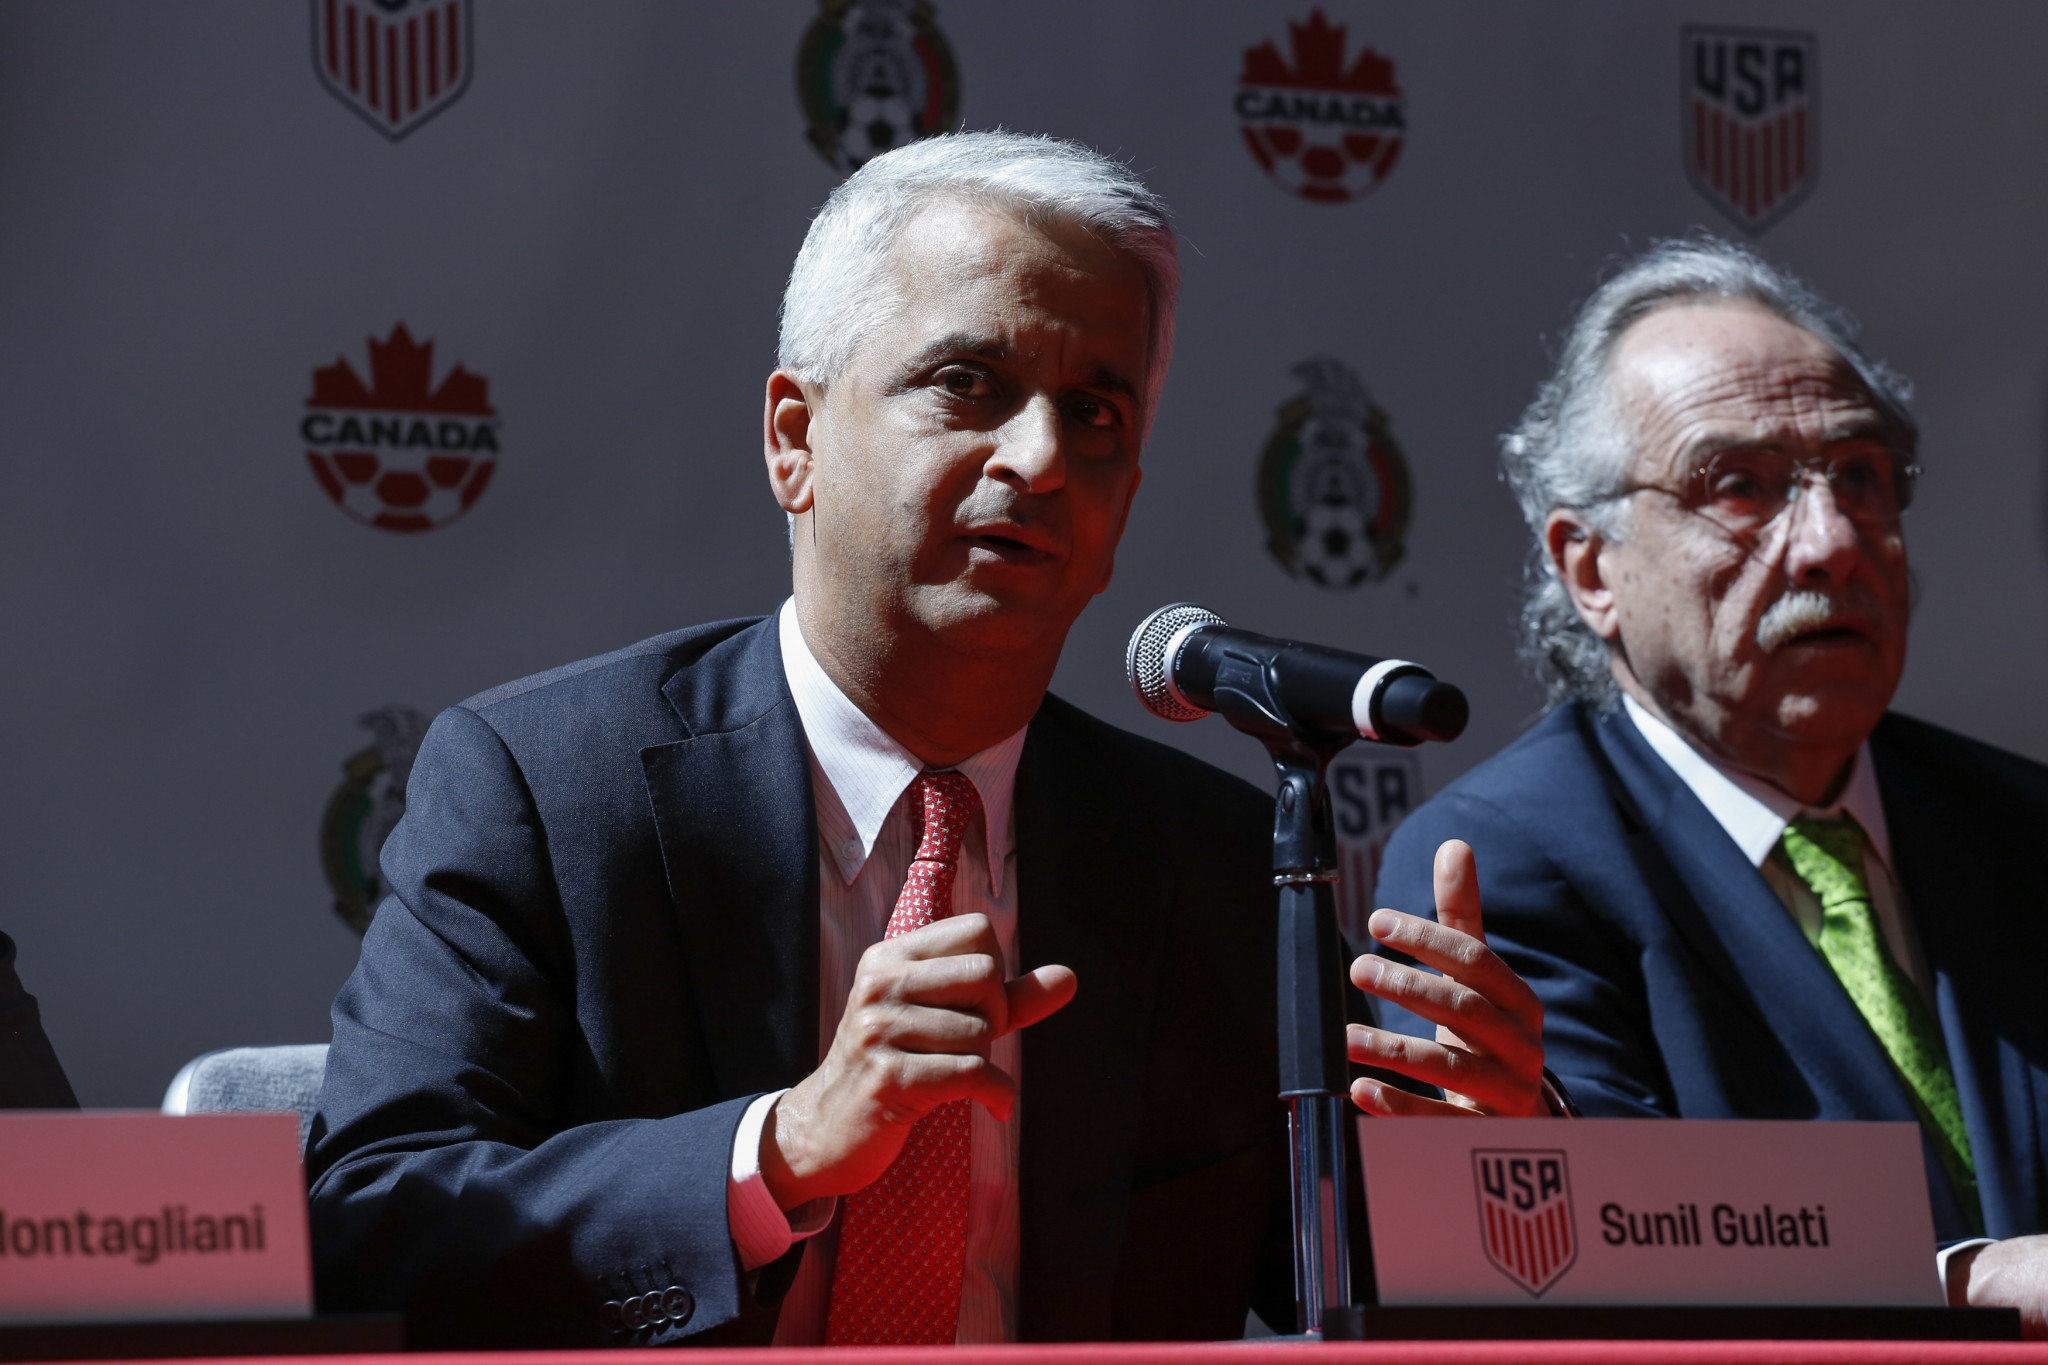 North American bid for 2026 FIFA World Cup changes leadership structure